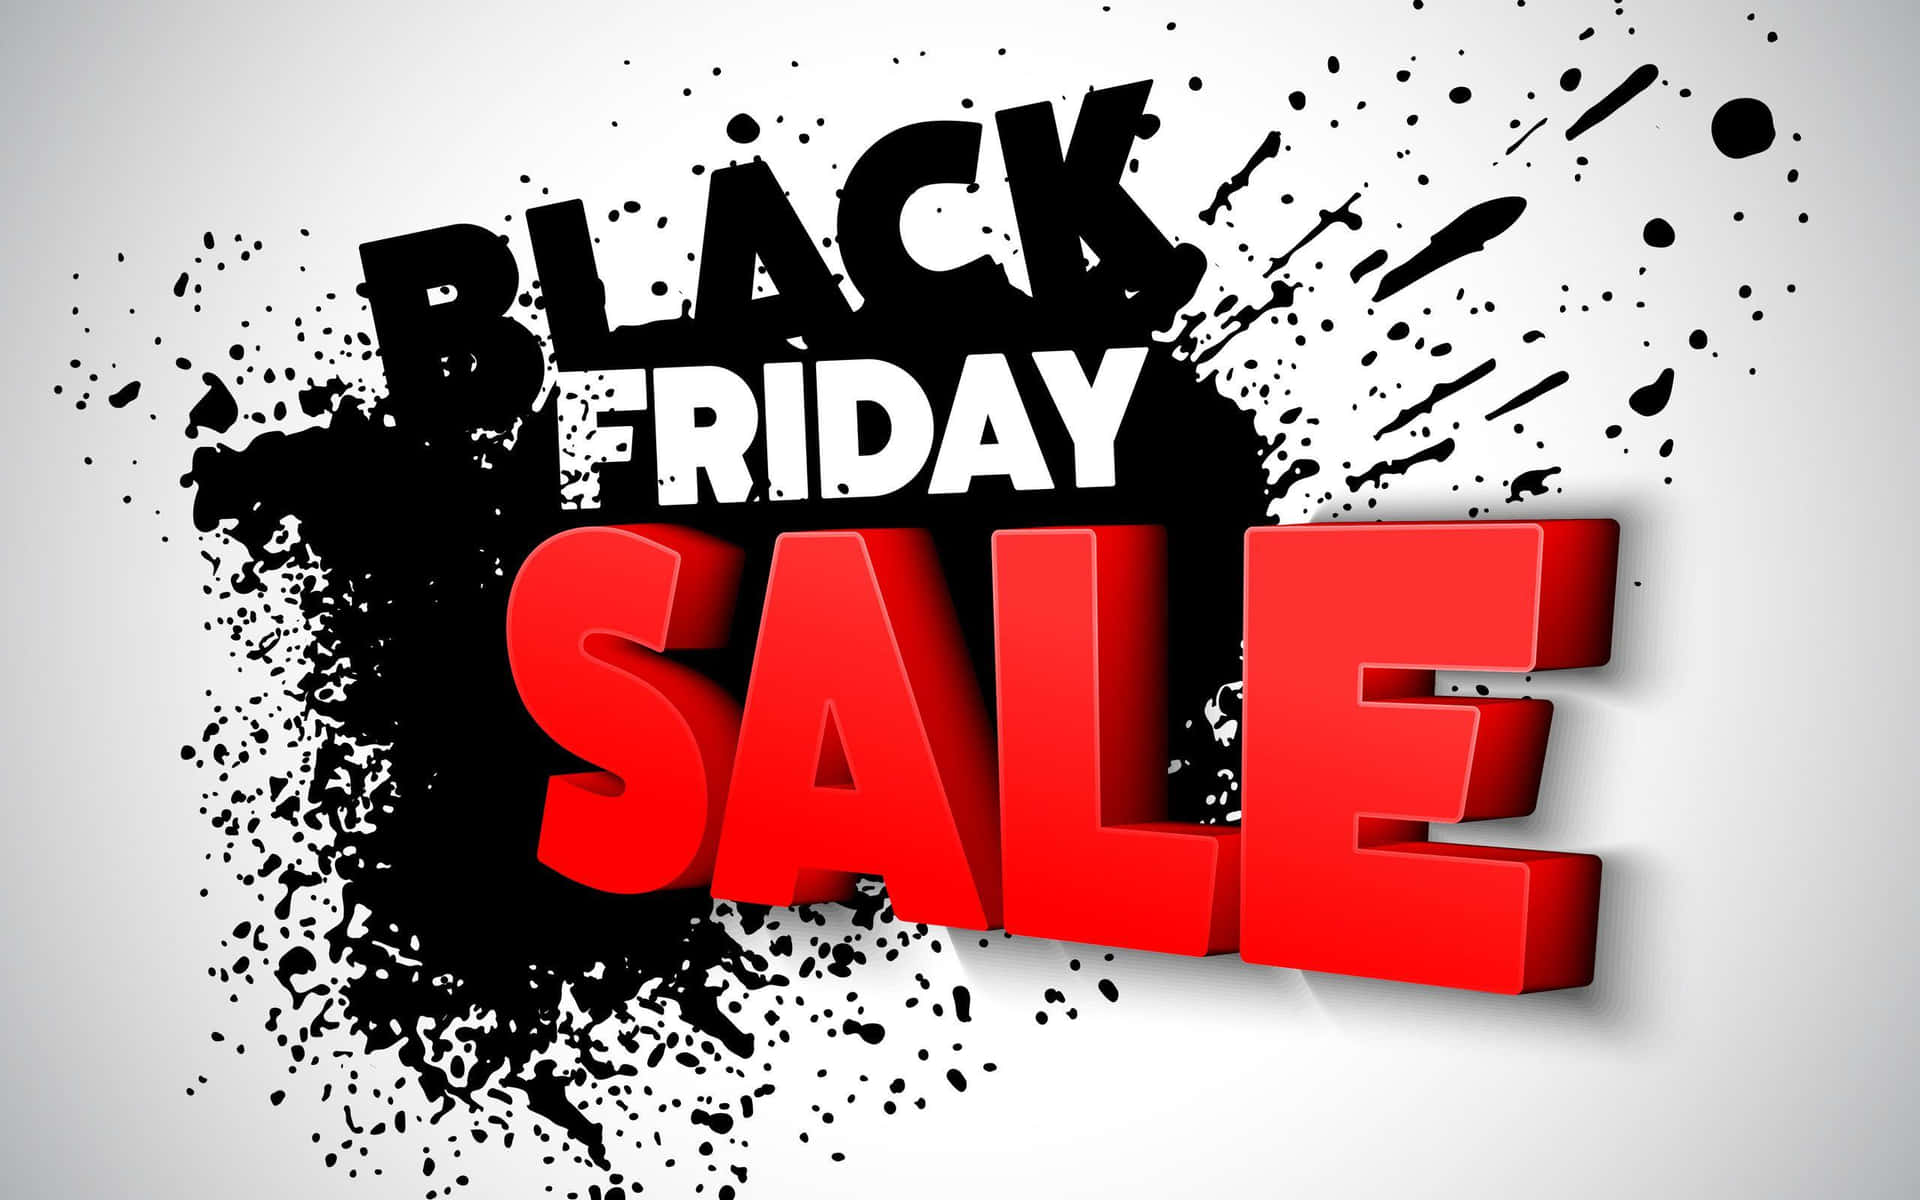 Black Friday Sale Sign With Red Splatters